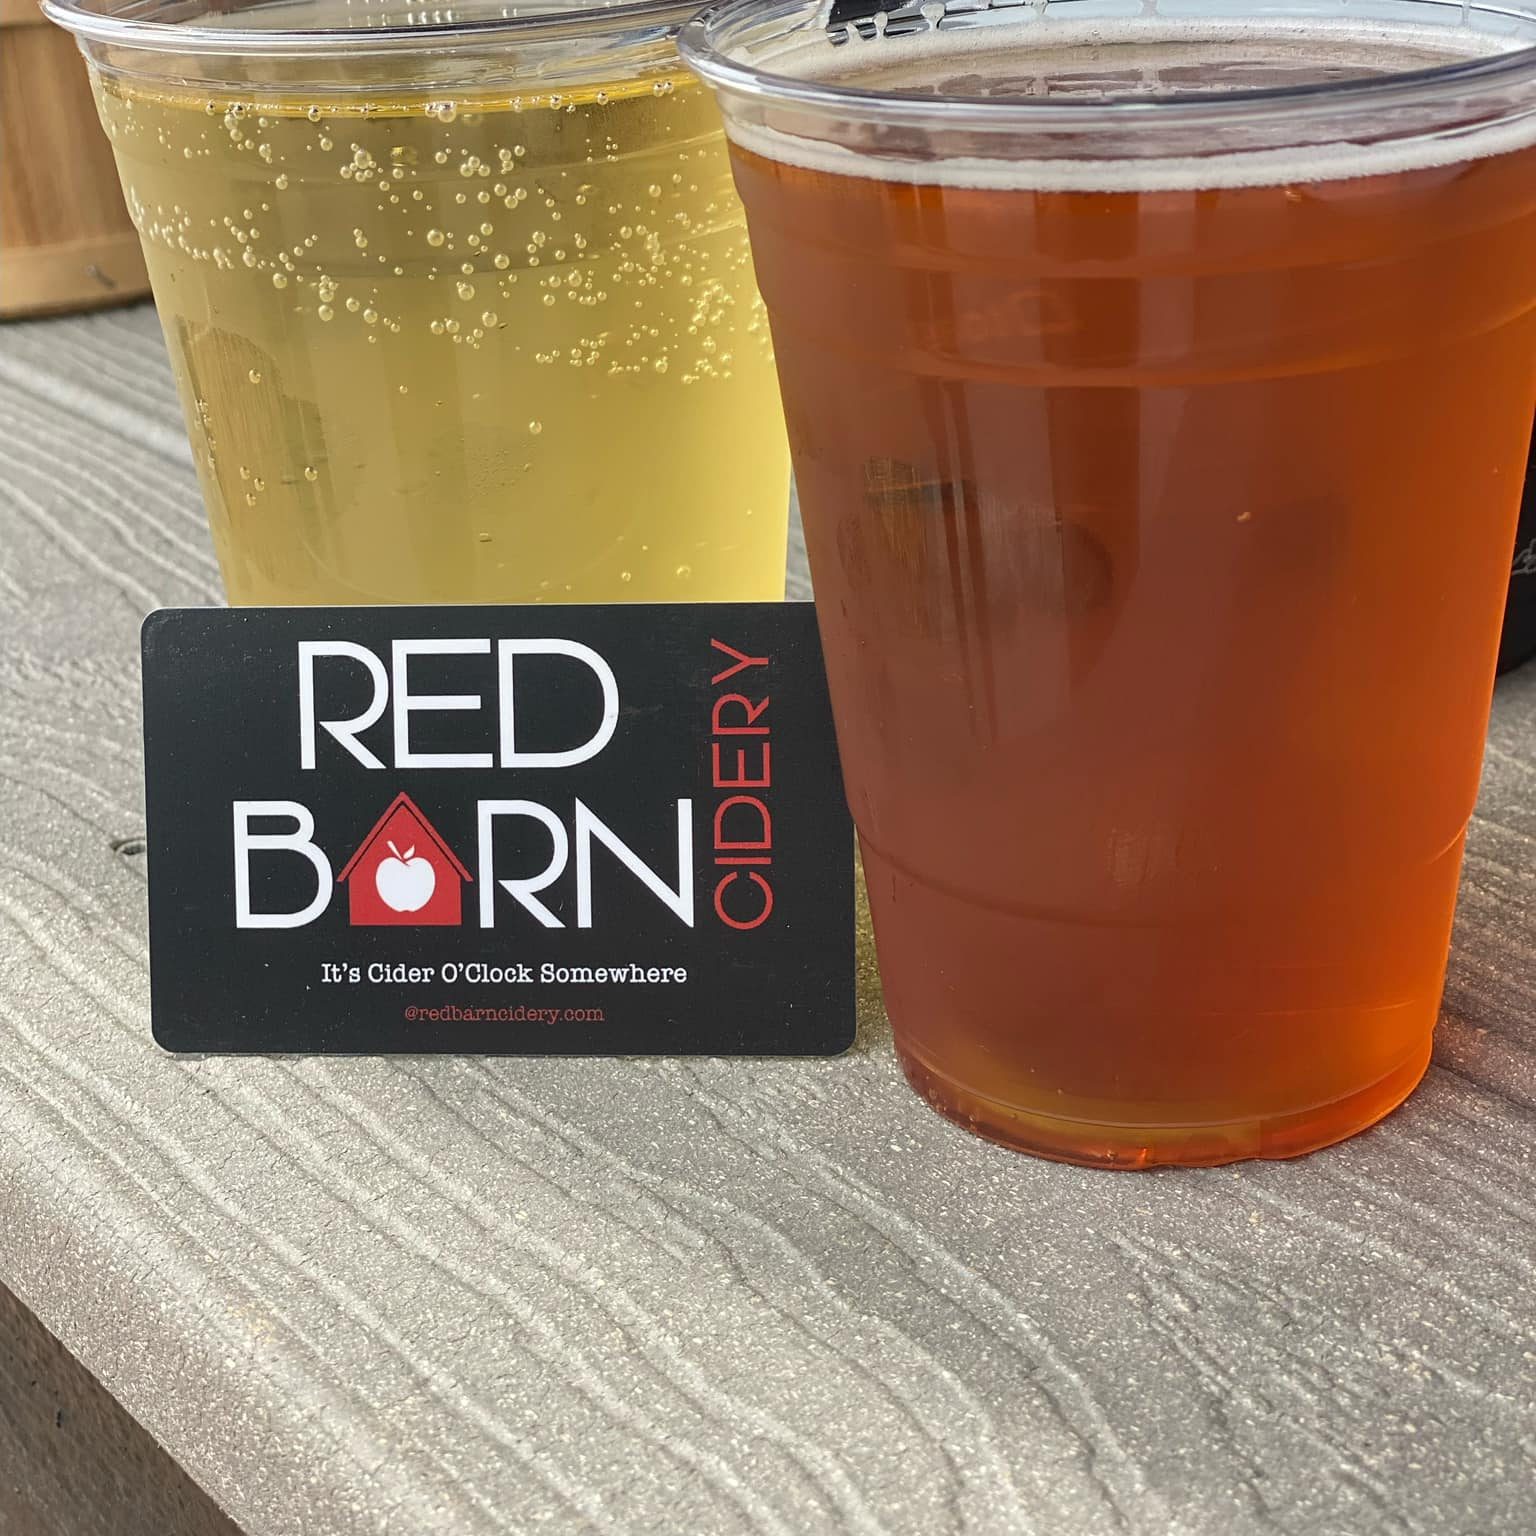 Cups of cider and business card from Red Barn Cidery in Rockland, NY